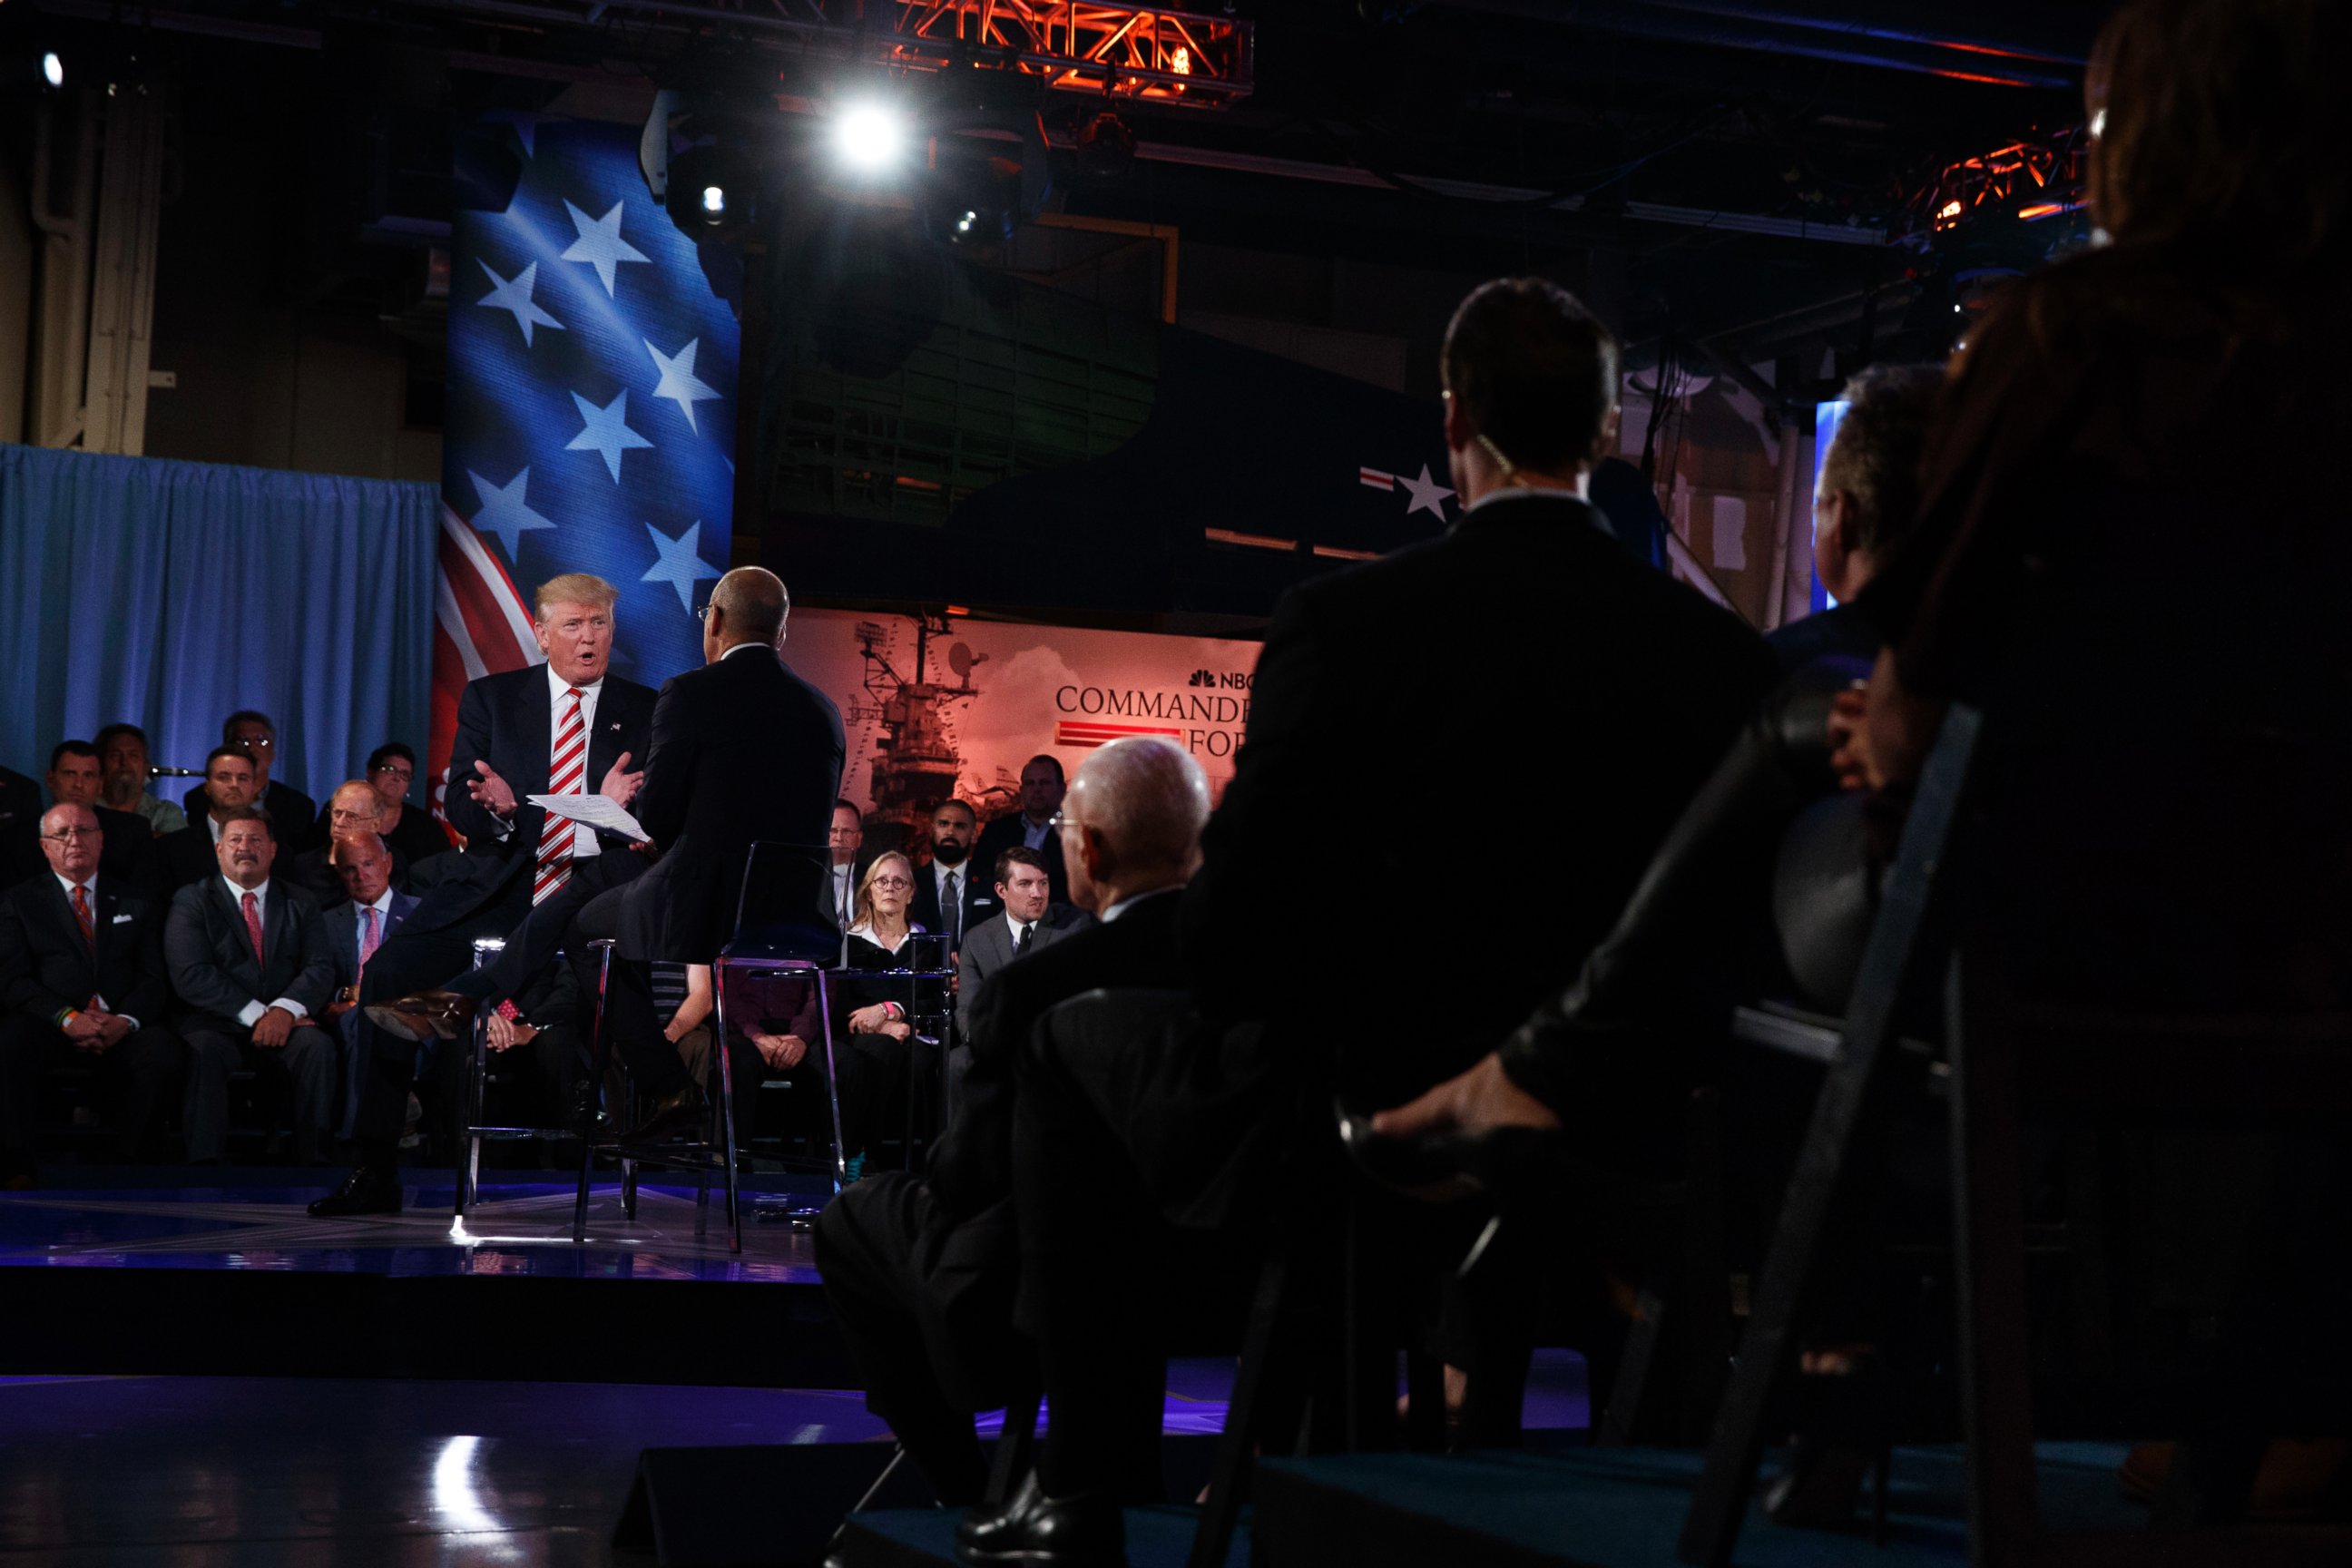 PHOTO:Republican presidential candidate Donald Trump speaks with Matt Lauer at the NBC Commander-In-Chief Forum held at the Intrepid Sea, Air and Space museum aboard the decommissioned aircraft carrier Intrepid, New York, NY Sept. 7, 2016. 